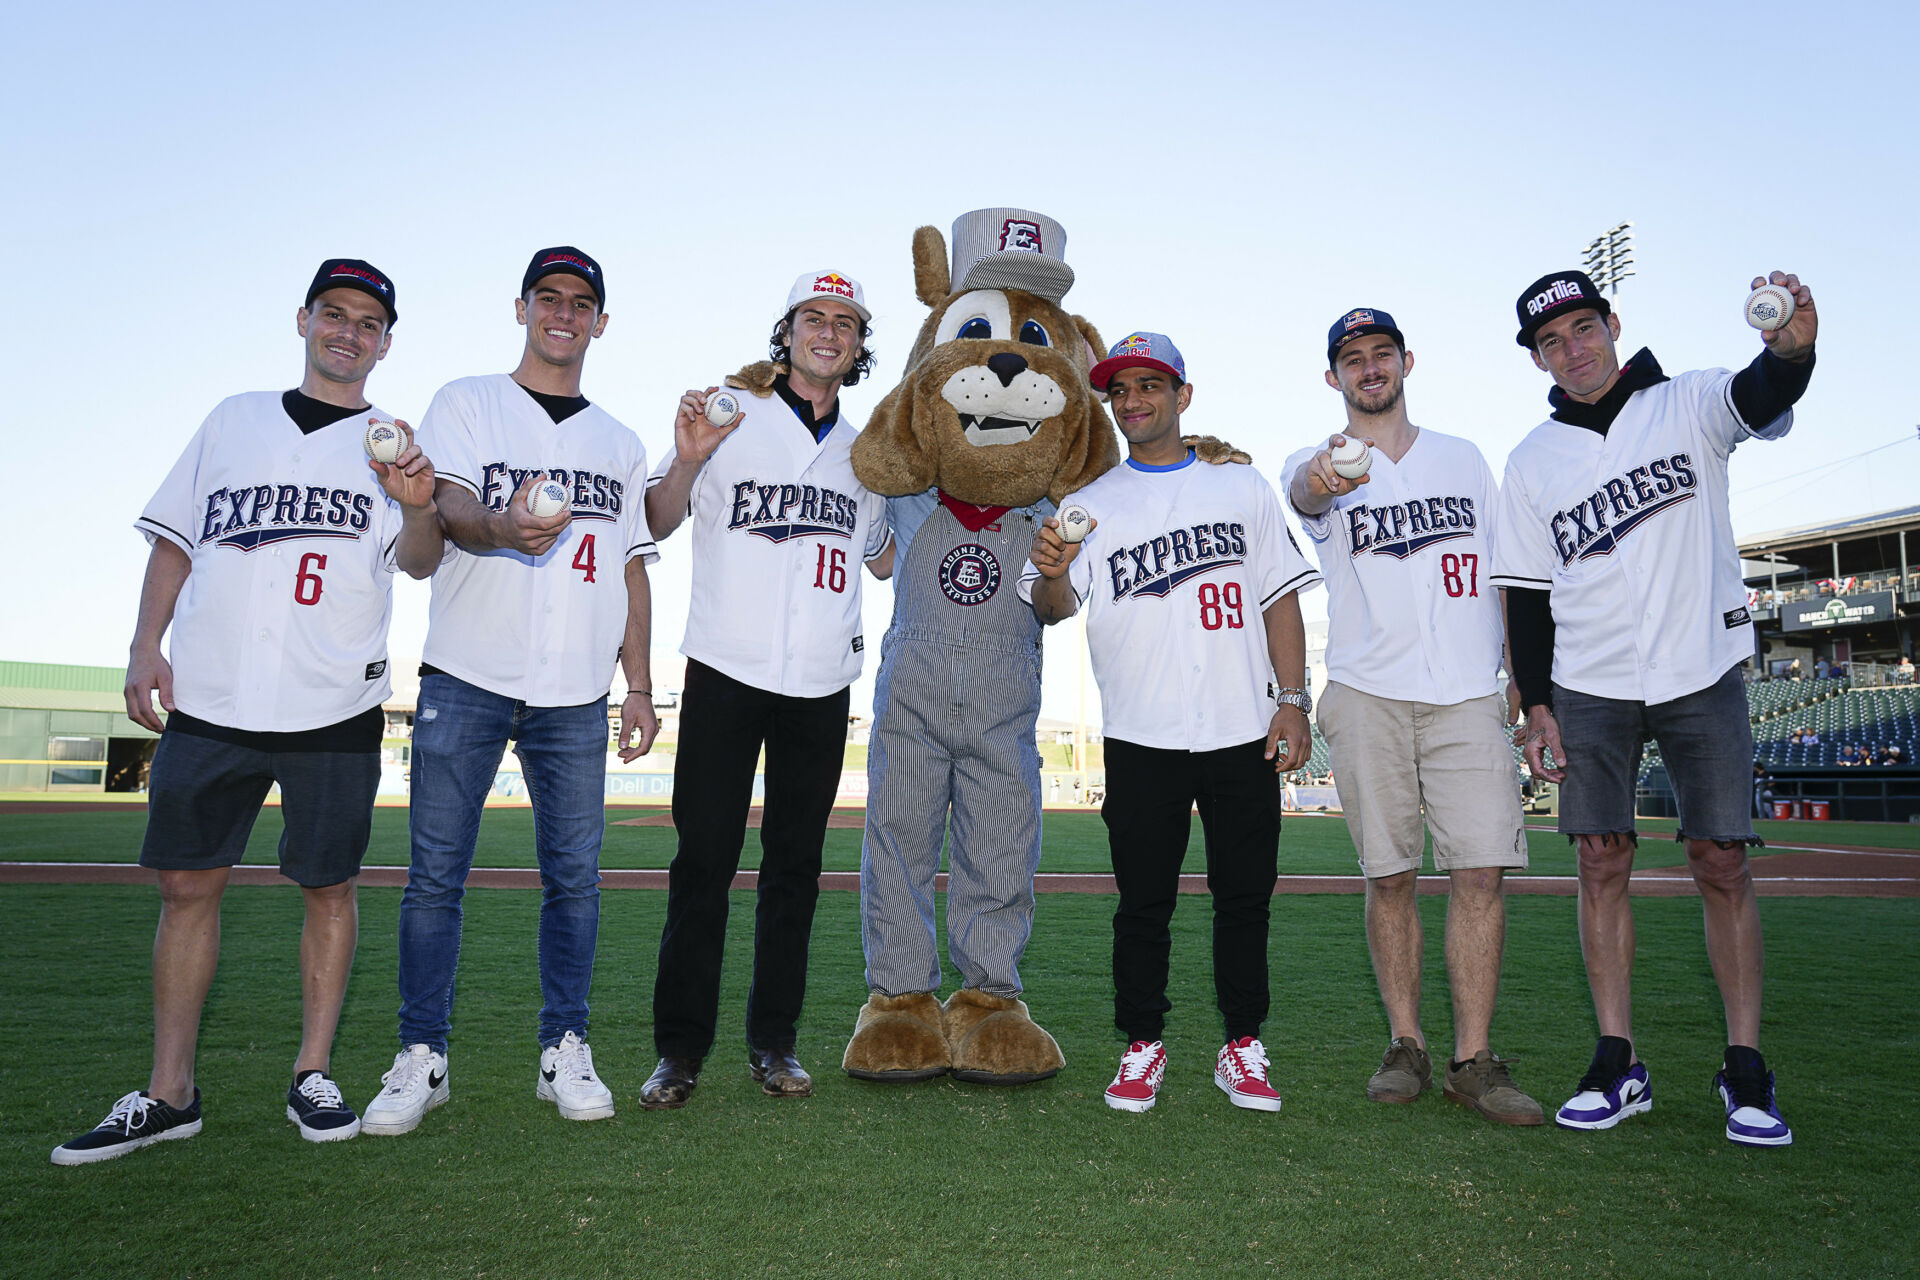 World Championship racers (from left) Cameron Beaubier, Sean Dylan Kelly, Joe Roberts, Jorge Martin, Remy Gardner, and Aleix Espargaro with the Round Rock Express team mascot 